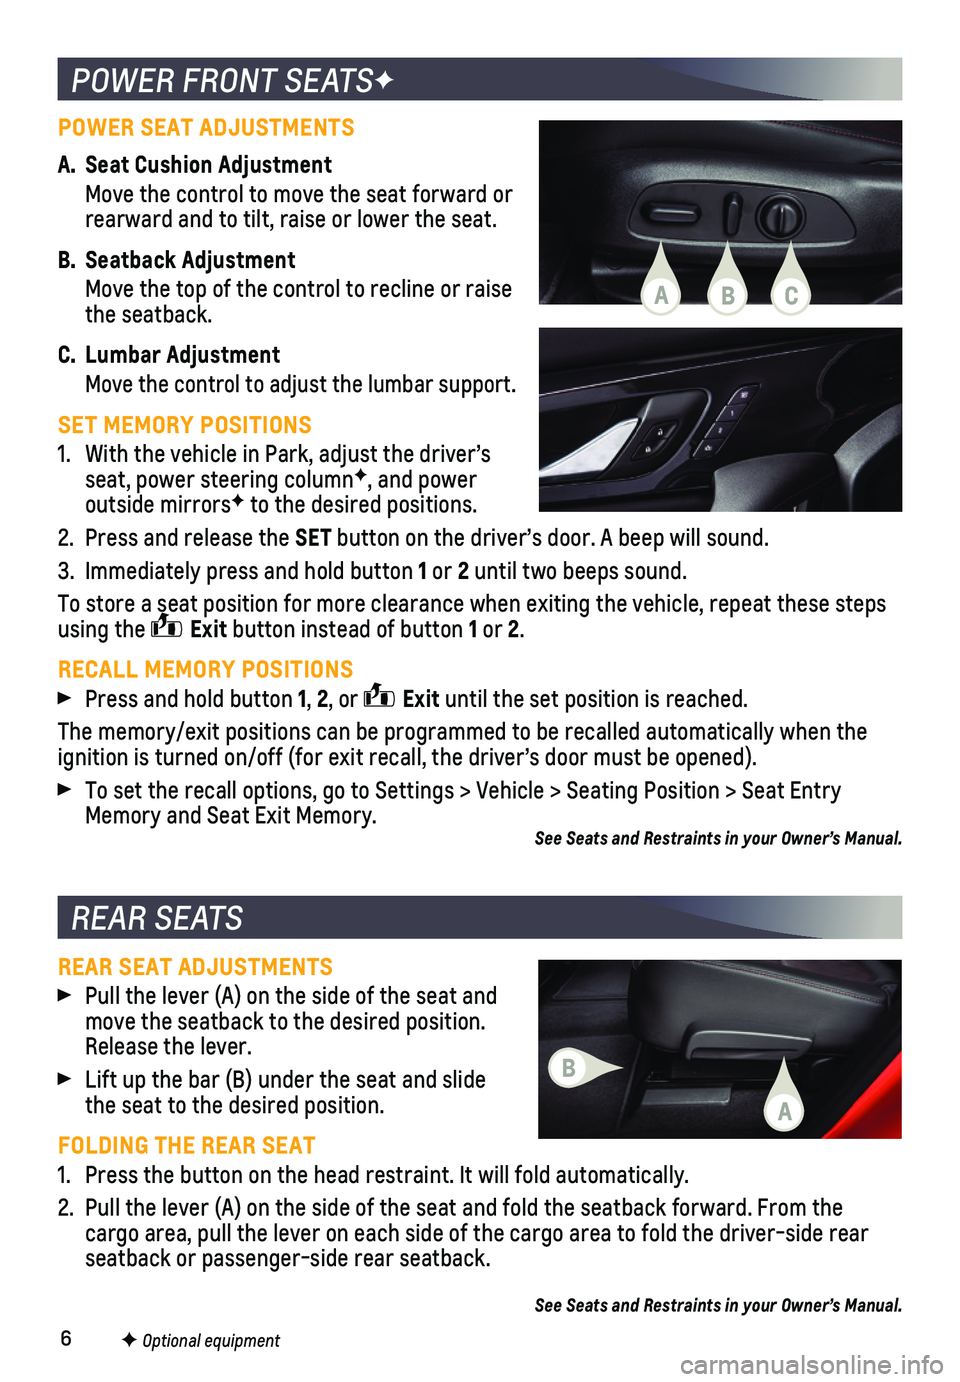 CHEVROLET BLAZER 2020  Get To Know Guide 6
POWER FRONT SEATSF
F Optional equipment
REAR SEATS
REAR SEAT ADJUSTMENTS
 Pull the lever (A) on the side of the seat and move the seatback to the desired position. Release the lever. 
 Lift up the b